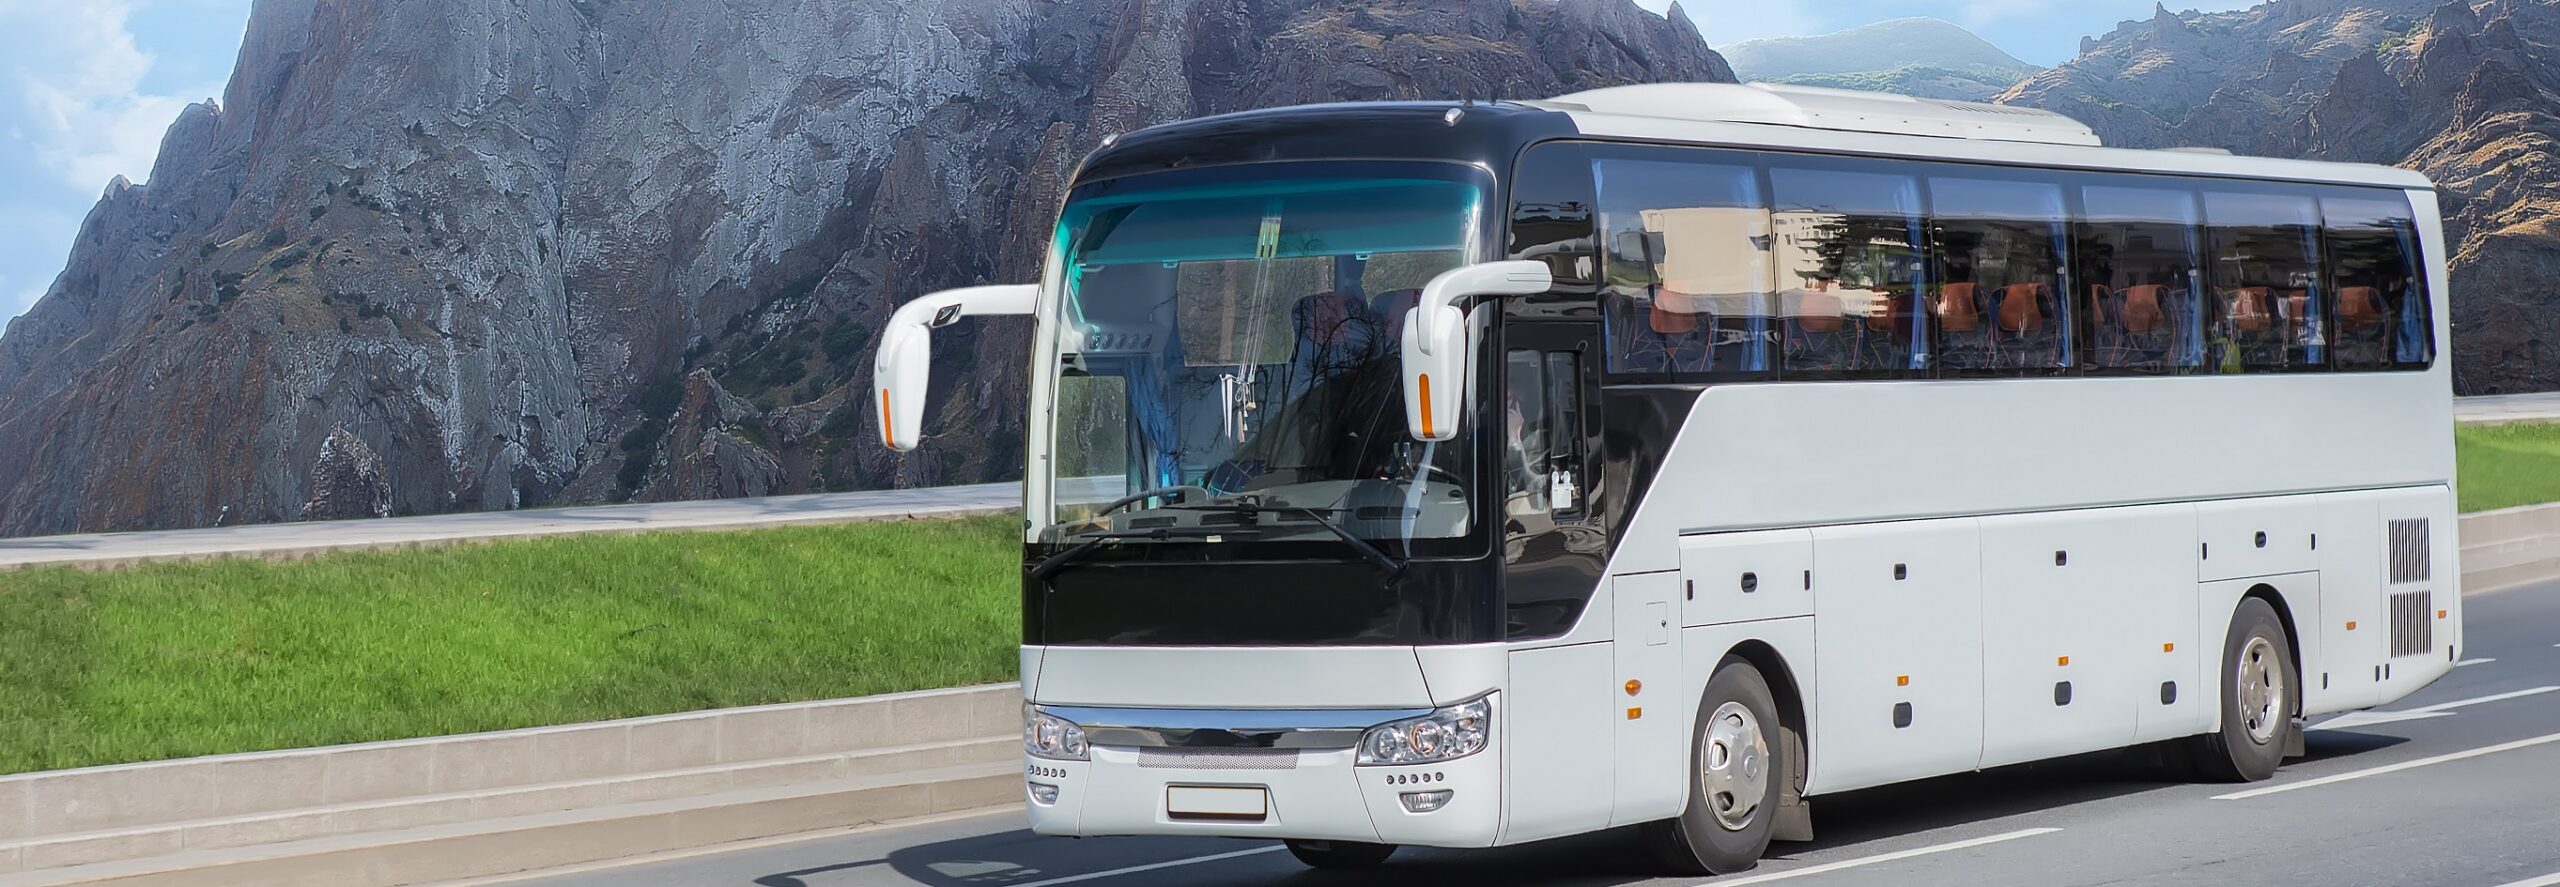 Coach Tours UK and Europe